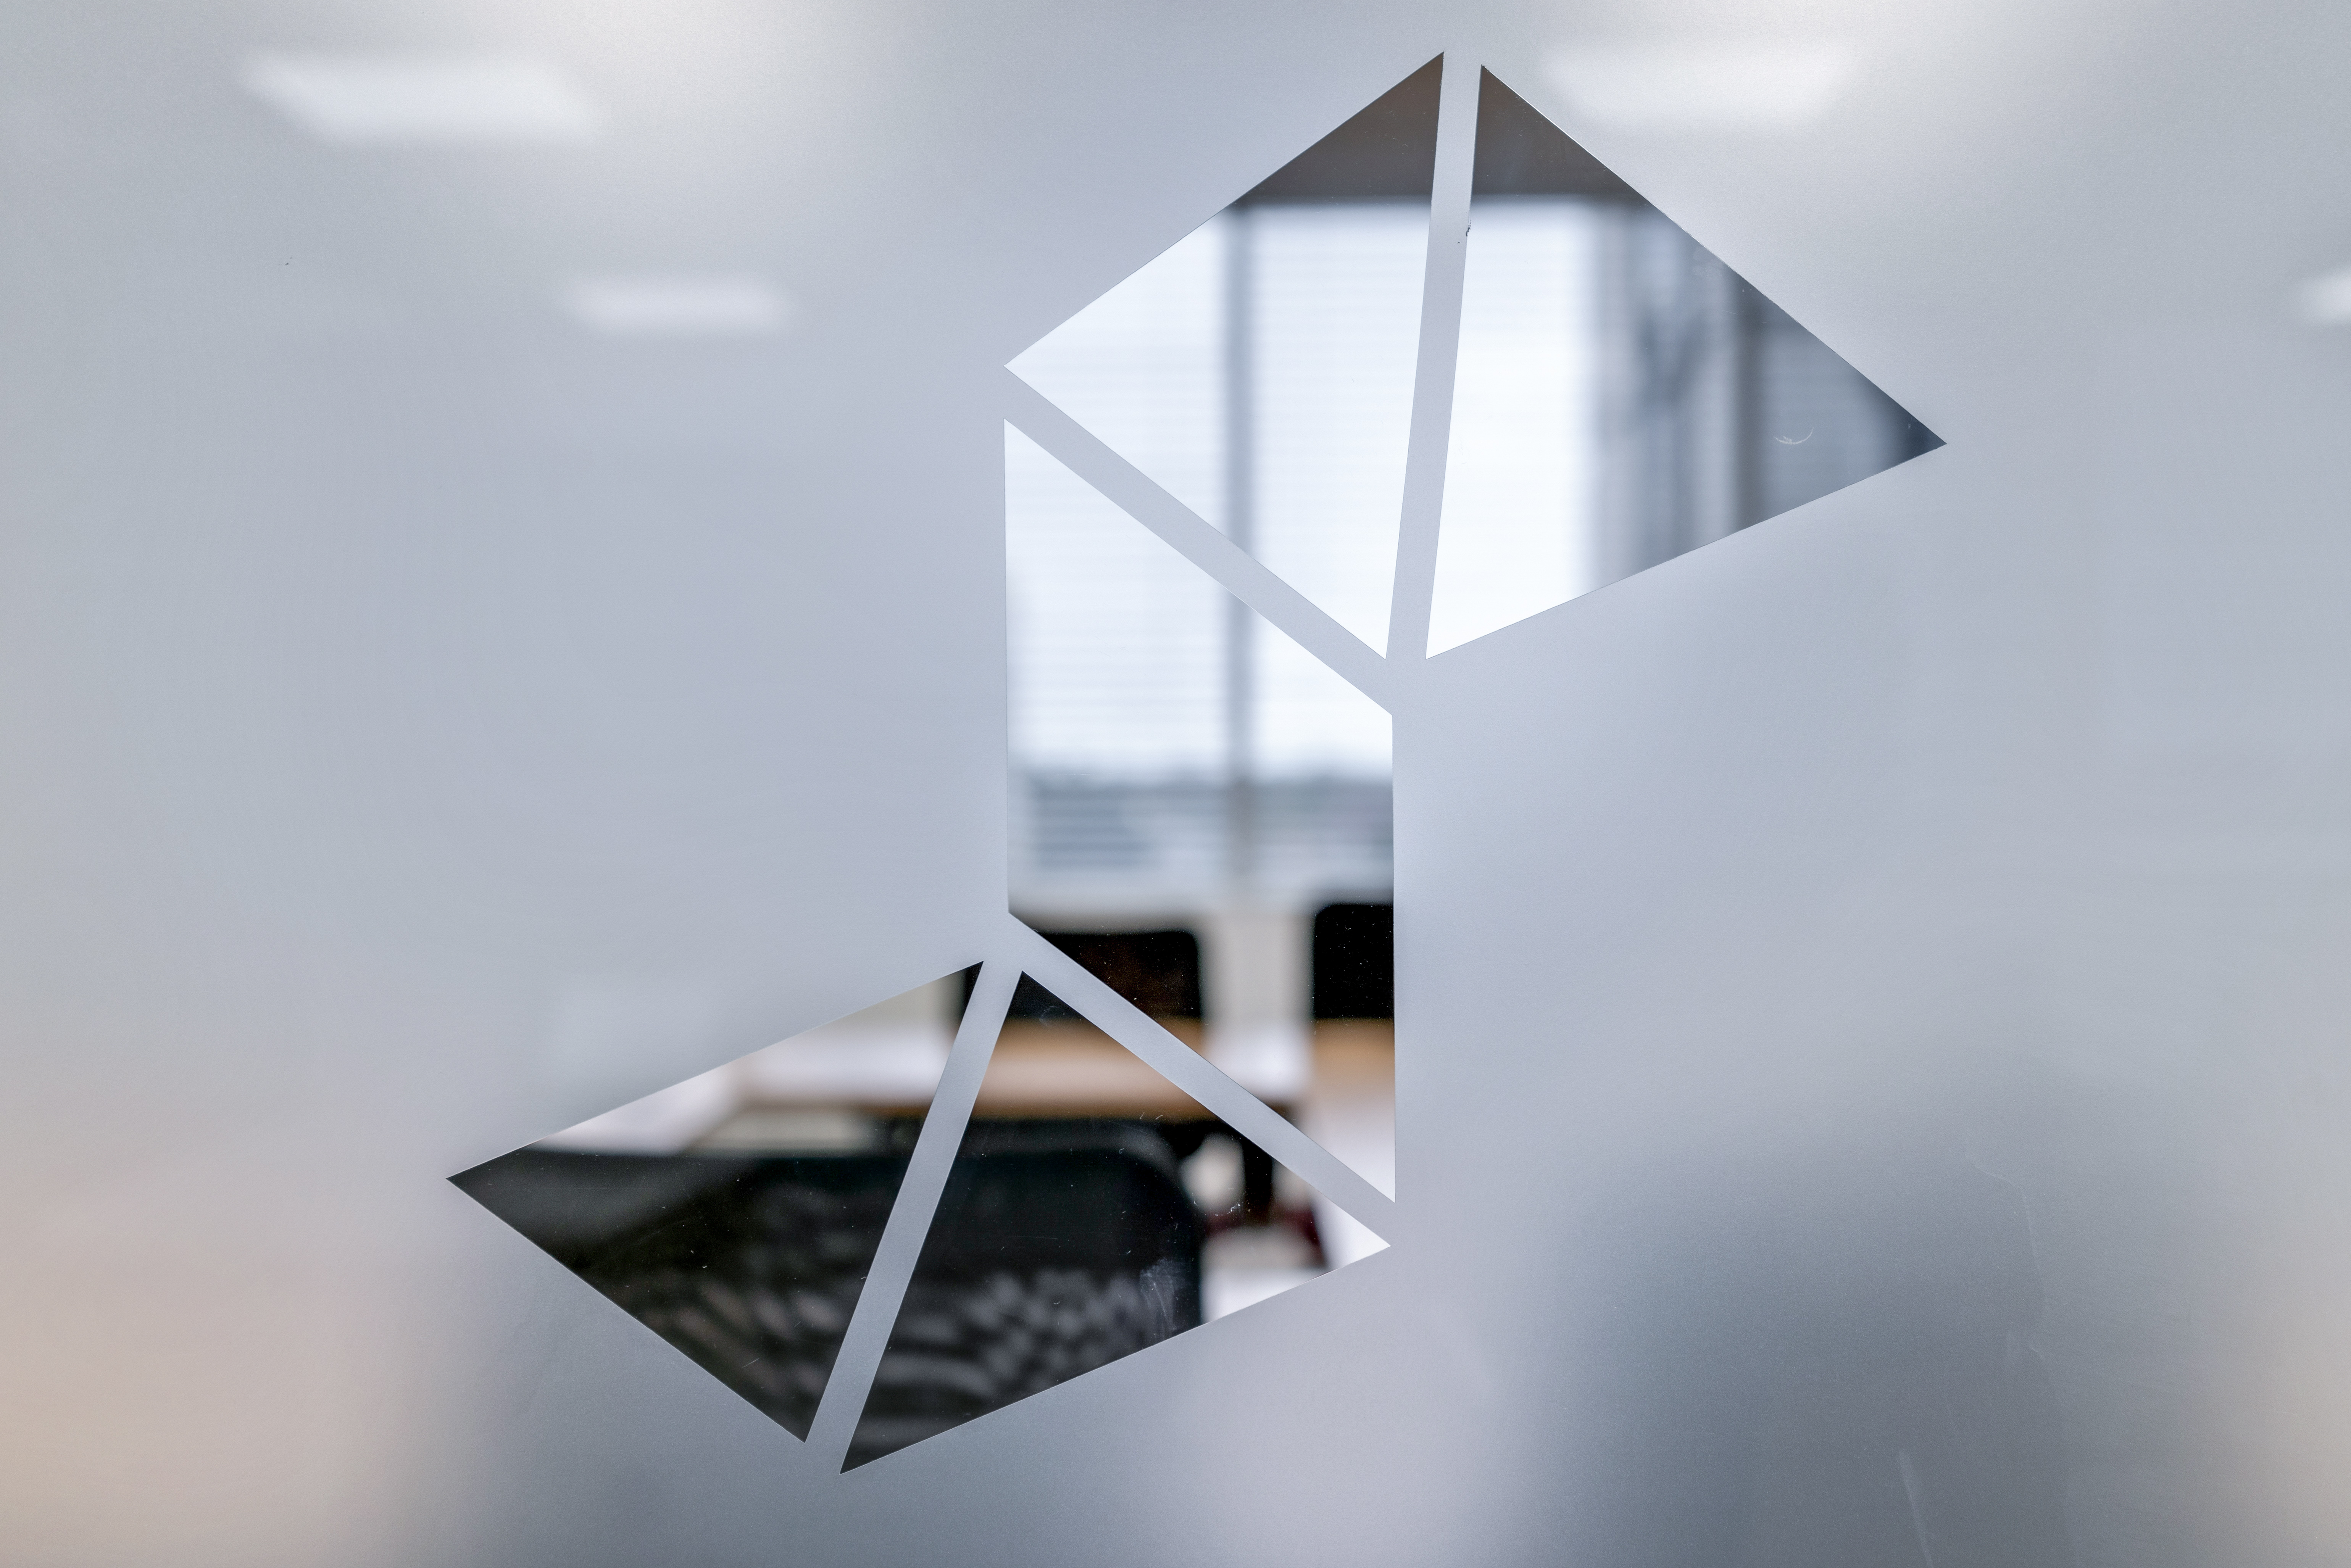 Close-up of frosted glass door in Stonewater office, with Stonewater 'S' logo on the door